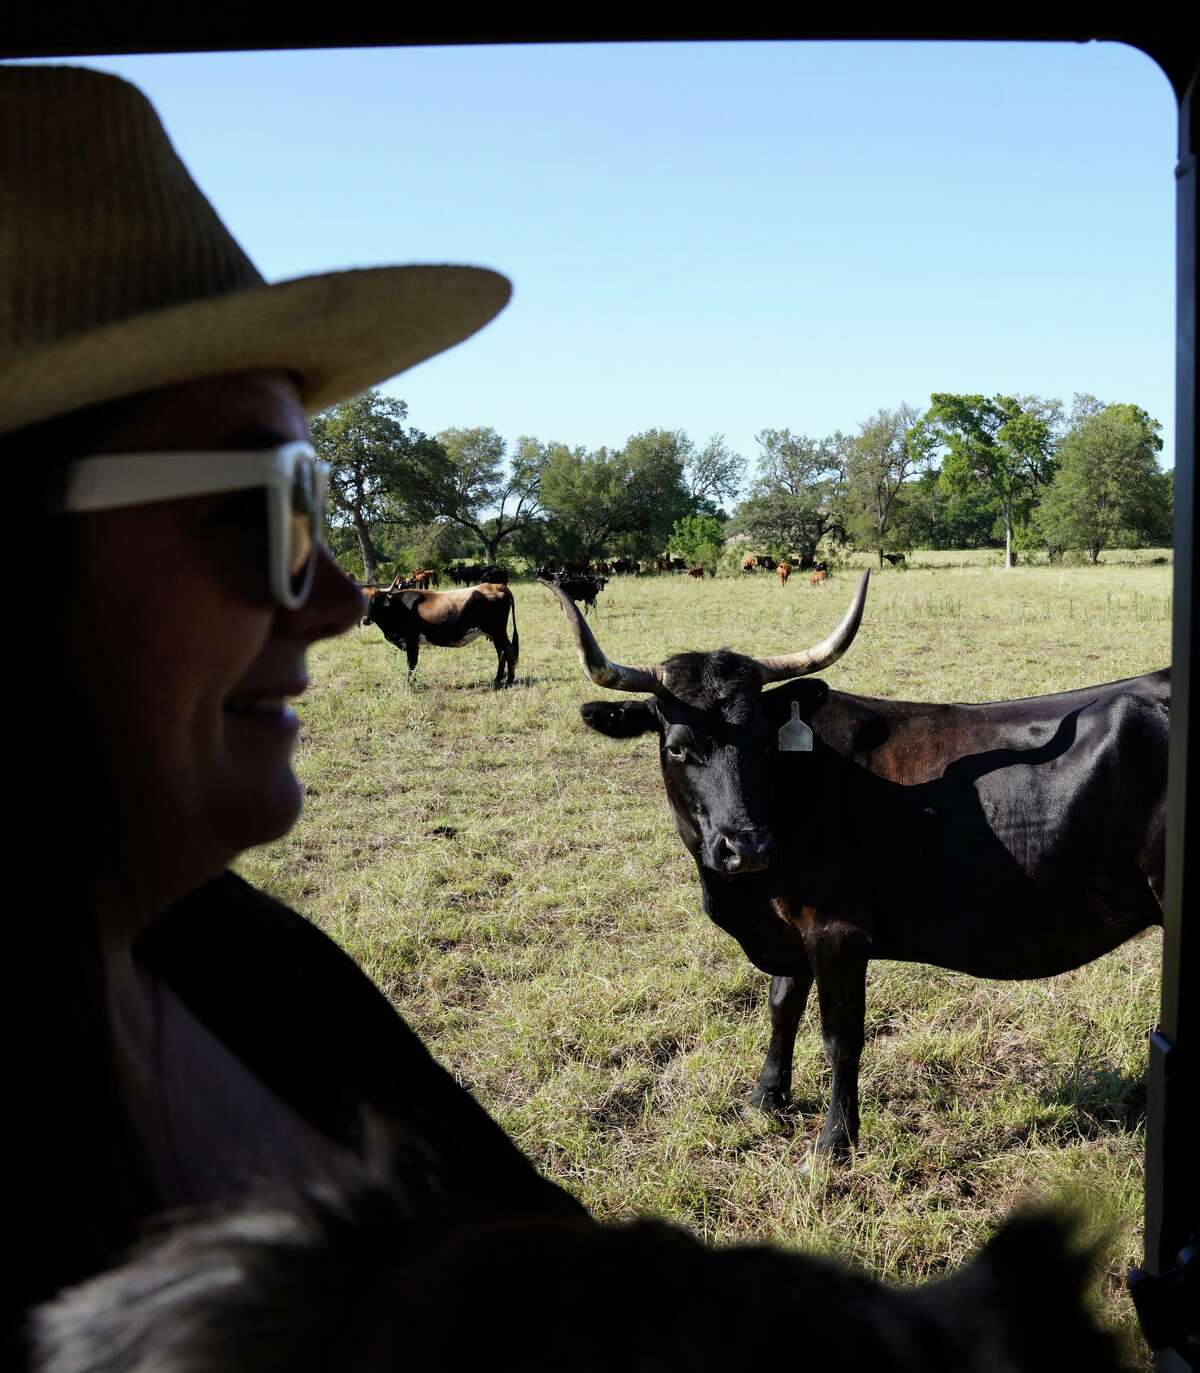 Maggie Eubank looks over a cattle pasture during a ranch tour to highlight regenerative agriculture methods as part of an ongoing process to prevent overuse of the fields and to maximize water conservation.